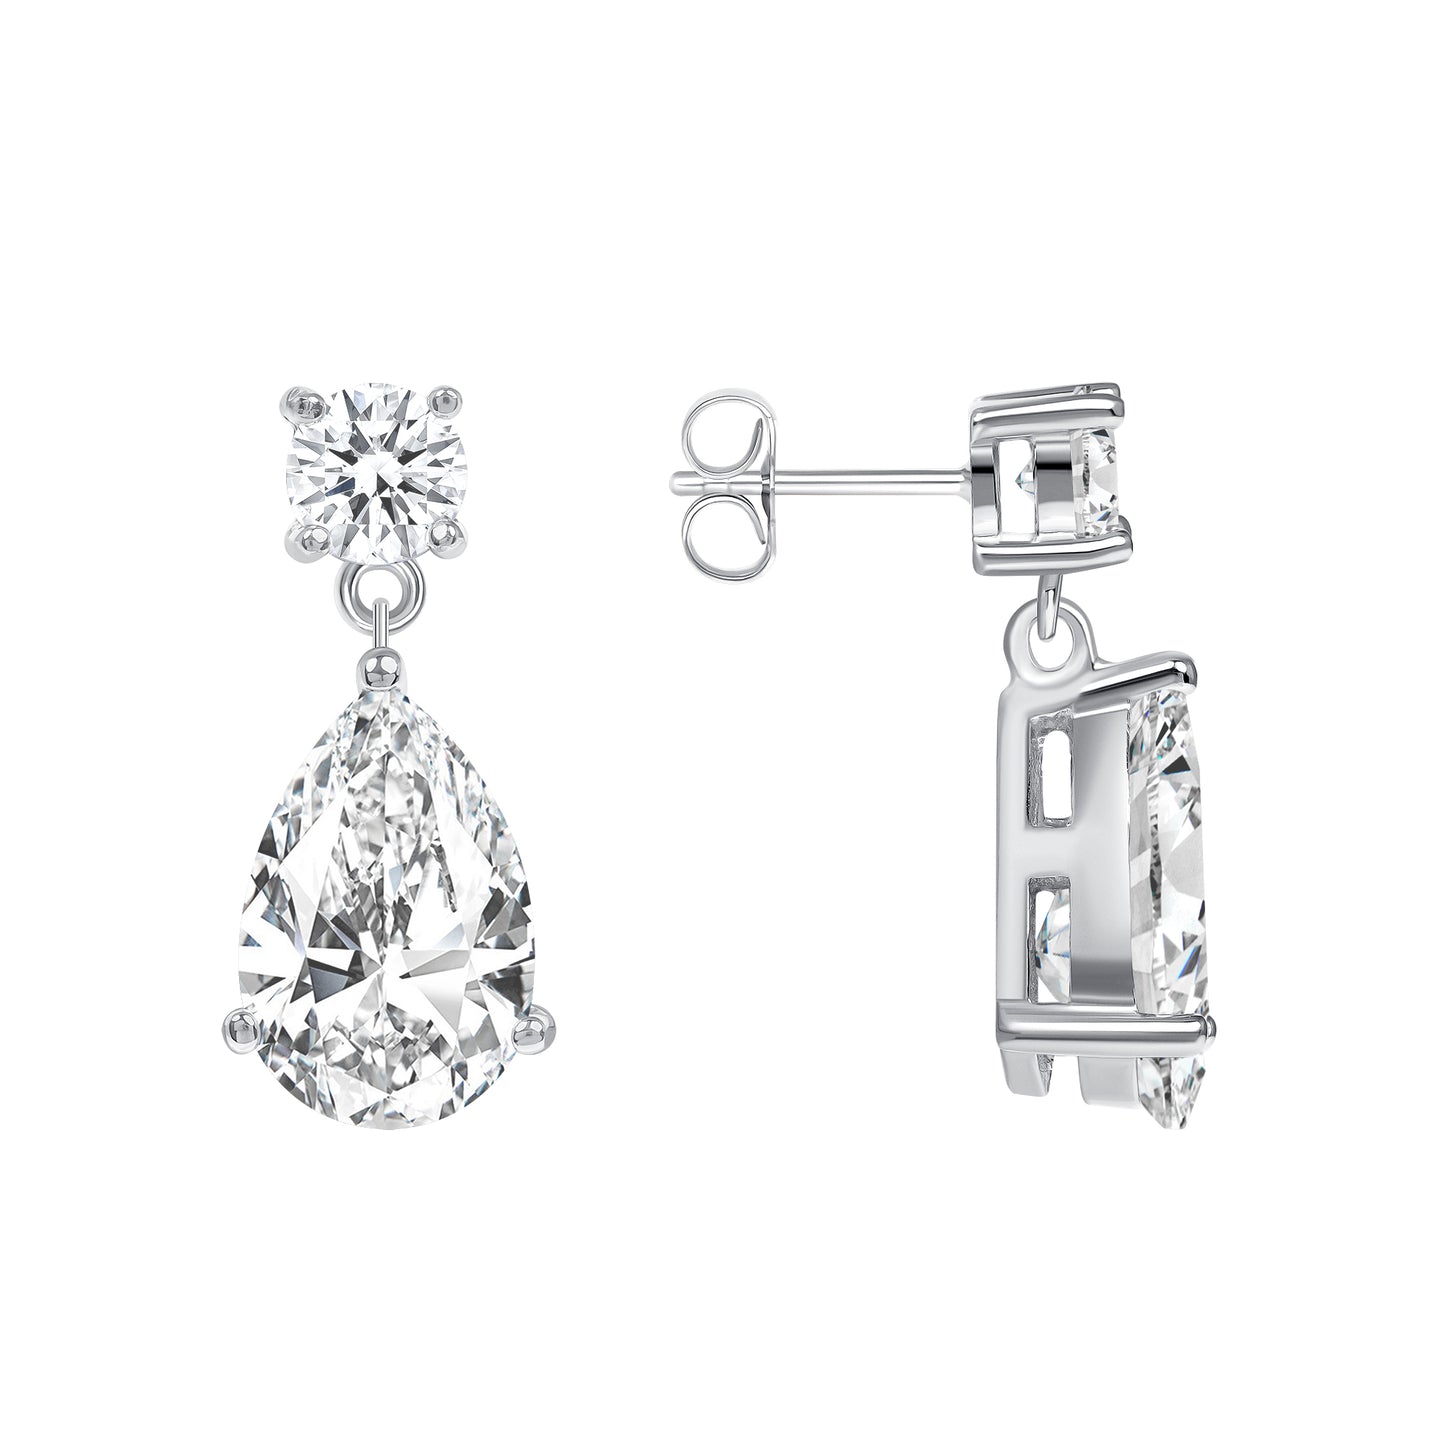 Silver 925 Rhodium Plated Dangle Pear Shape Cubic Zirconia Earrings and Pendant Set. SETIP0030